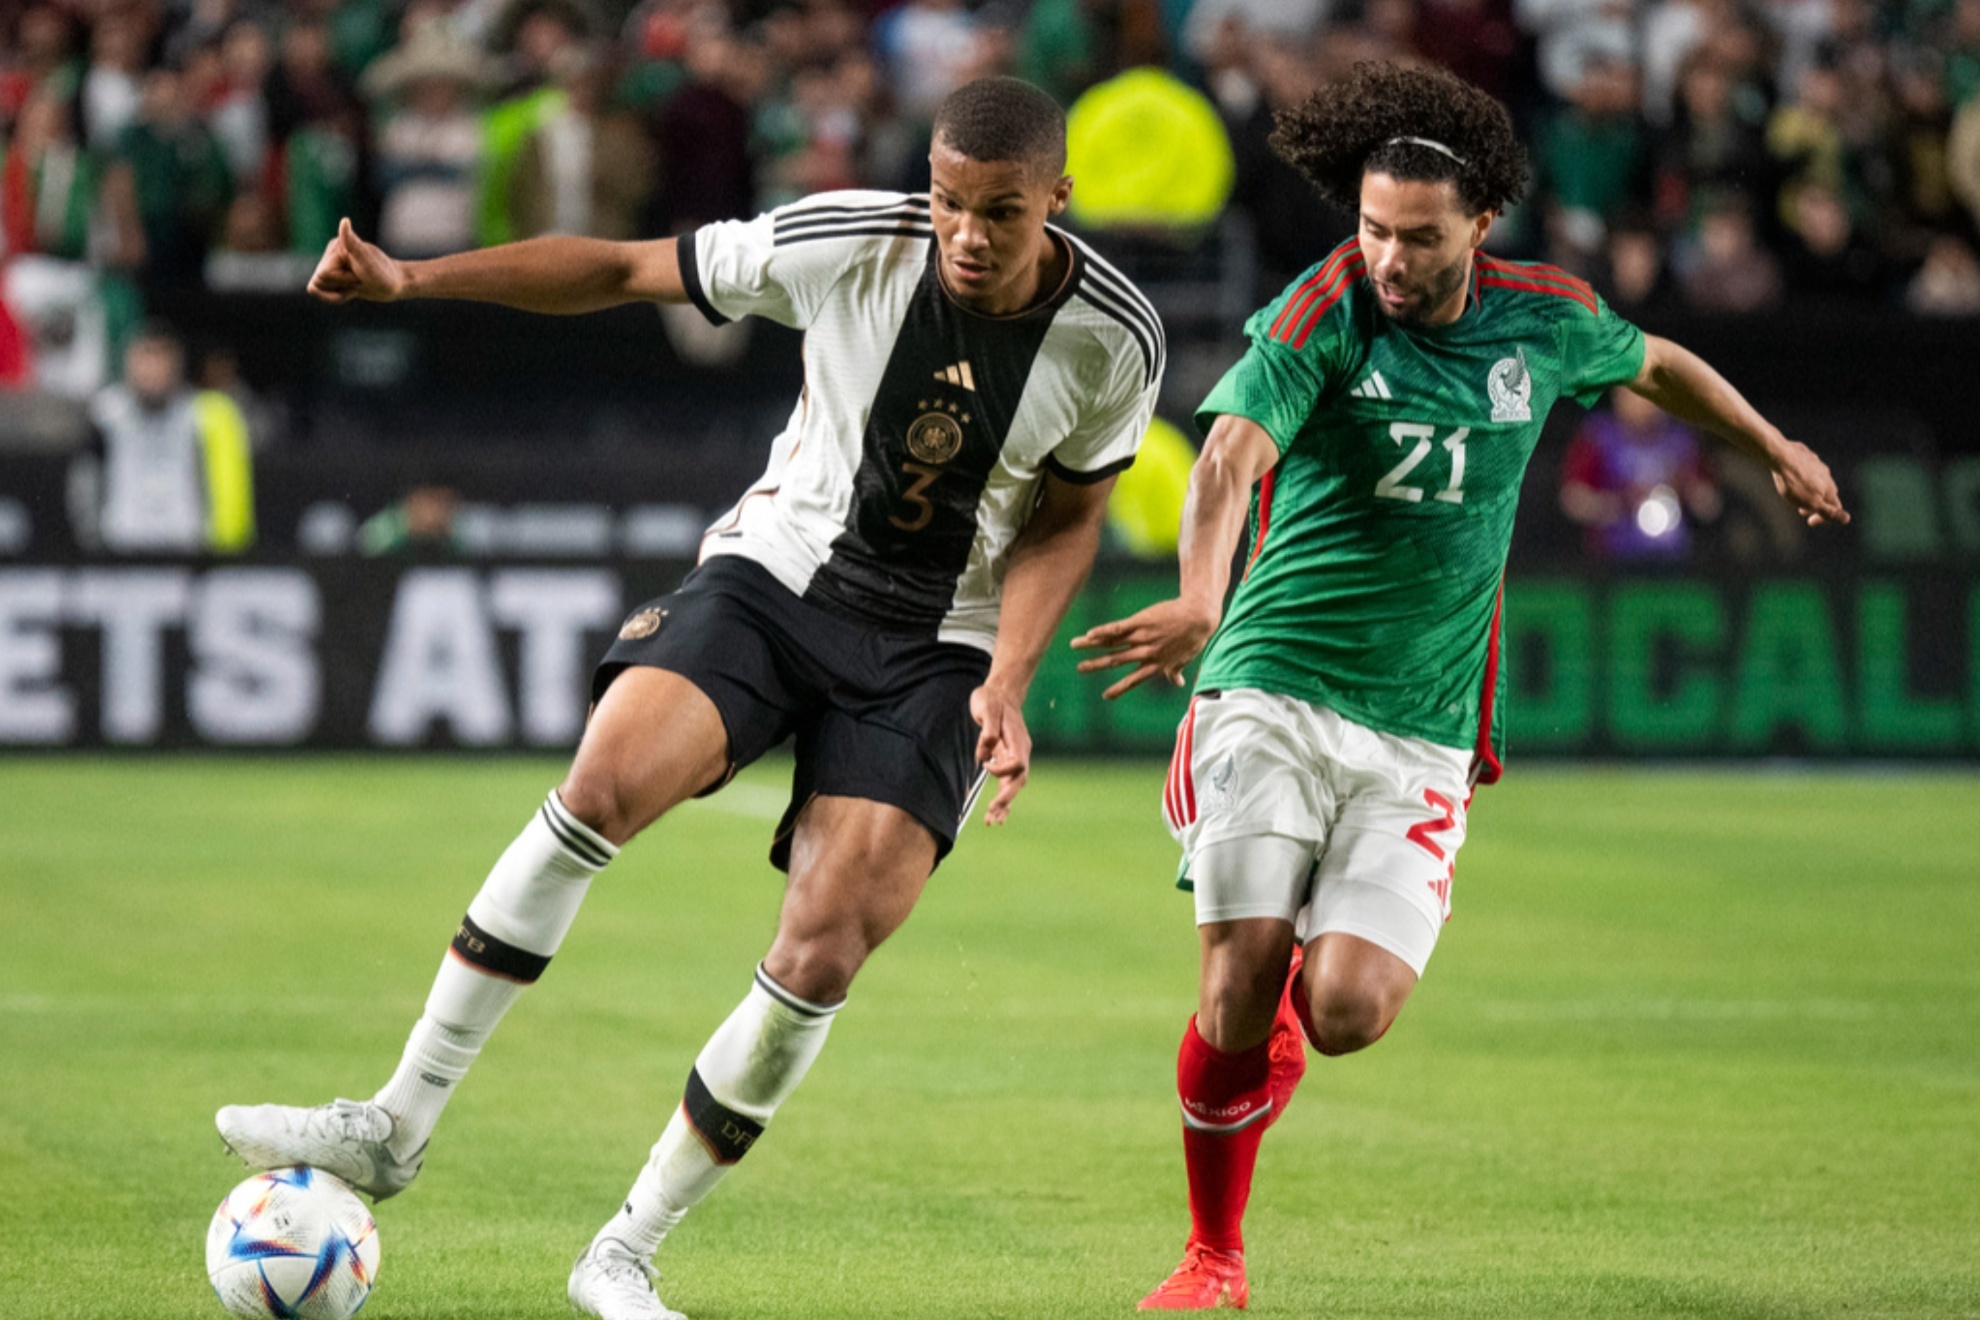 Mexico and Germany tied at two goals apiece in their friendly game in Philadelphia